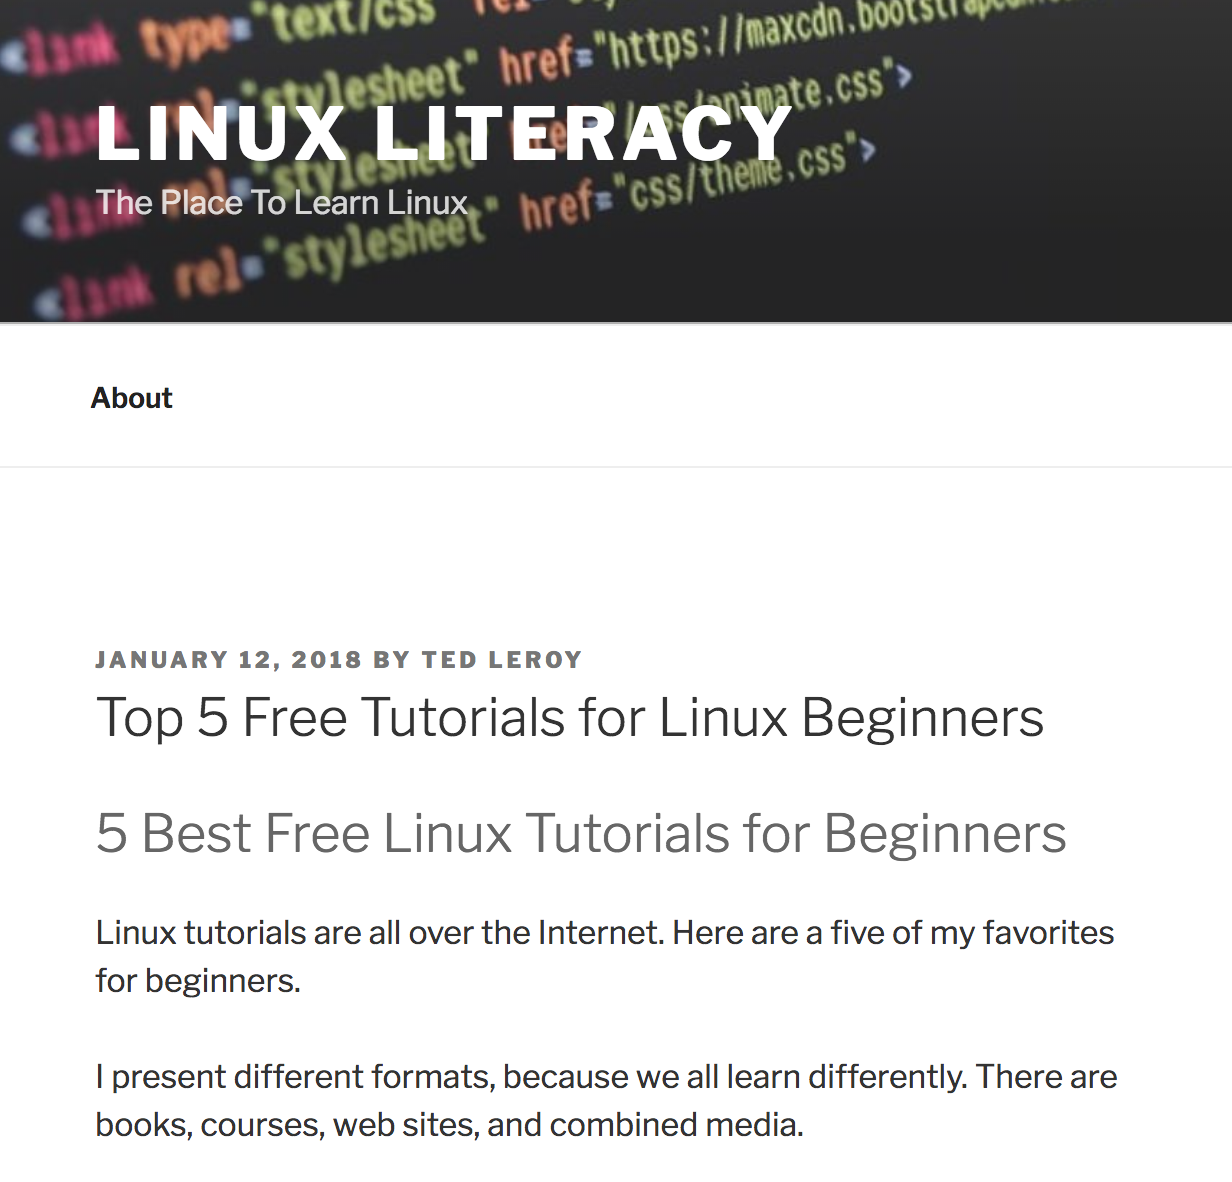 Top 5 Free Tutorials for Linux Beginners